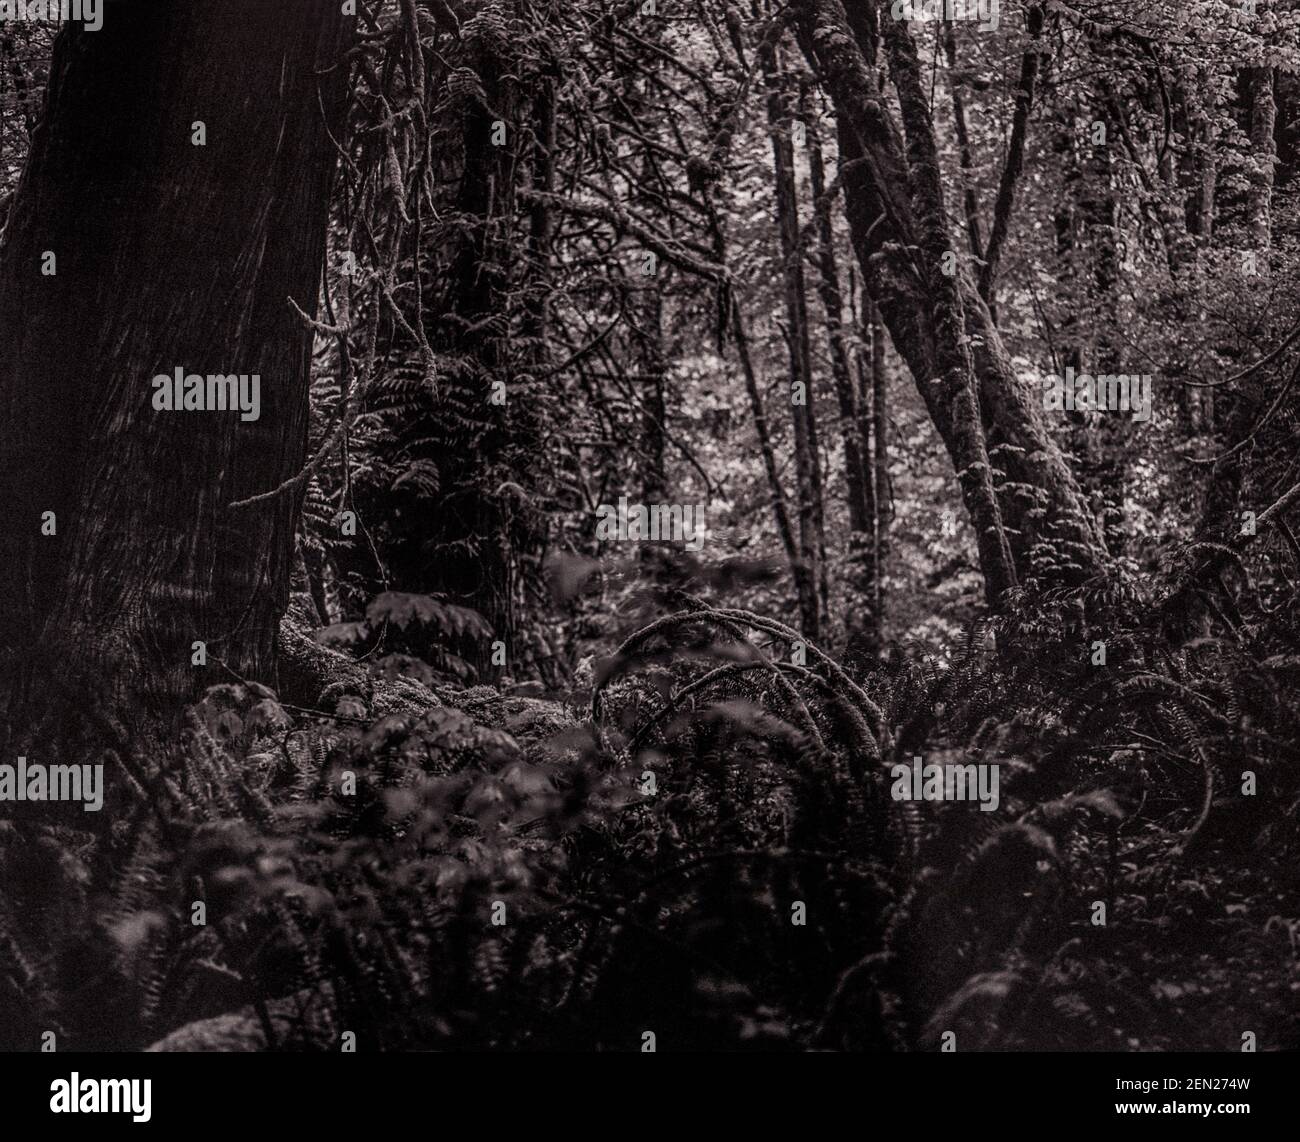 Moss covered trees and branches in a forest creating a haunting and mysterious scene Stock Photo